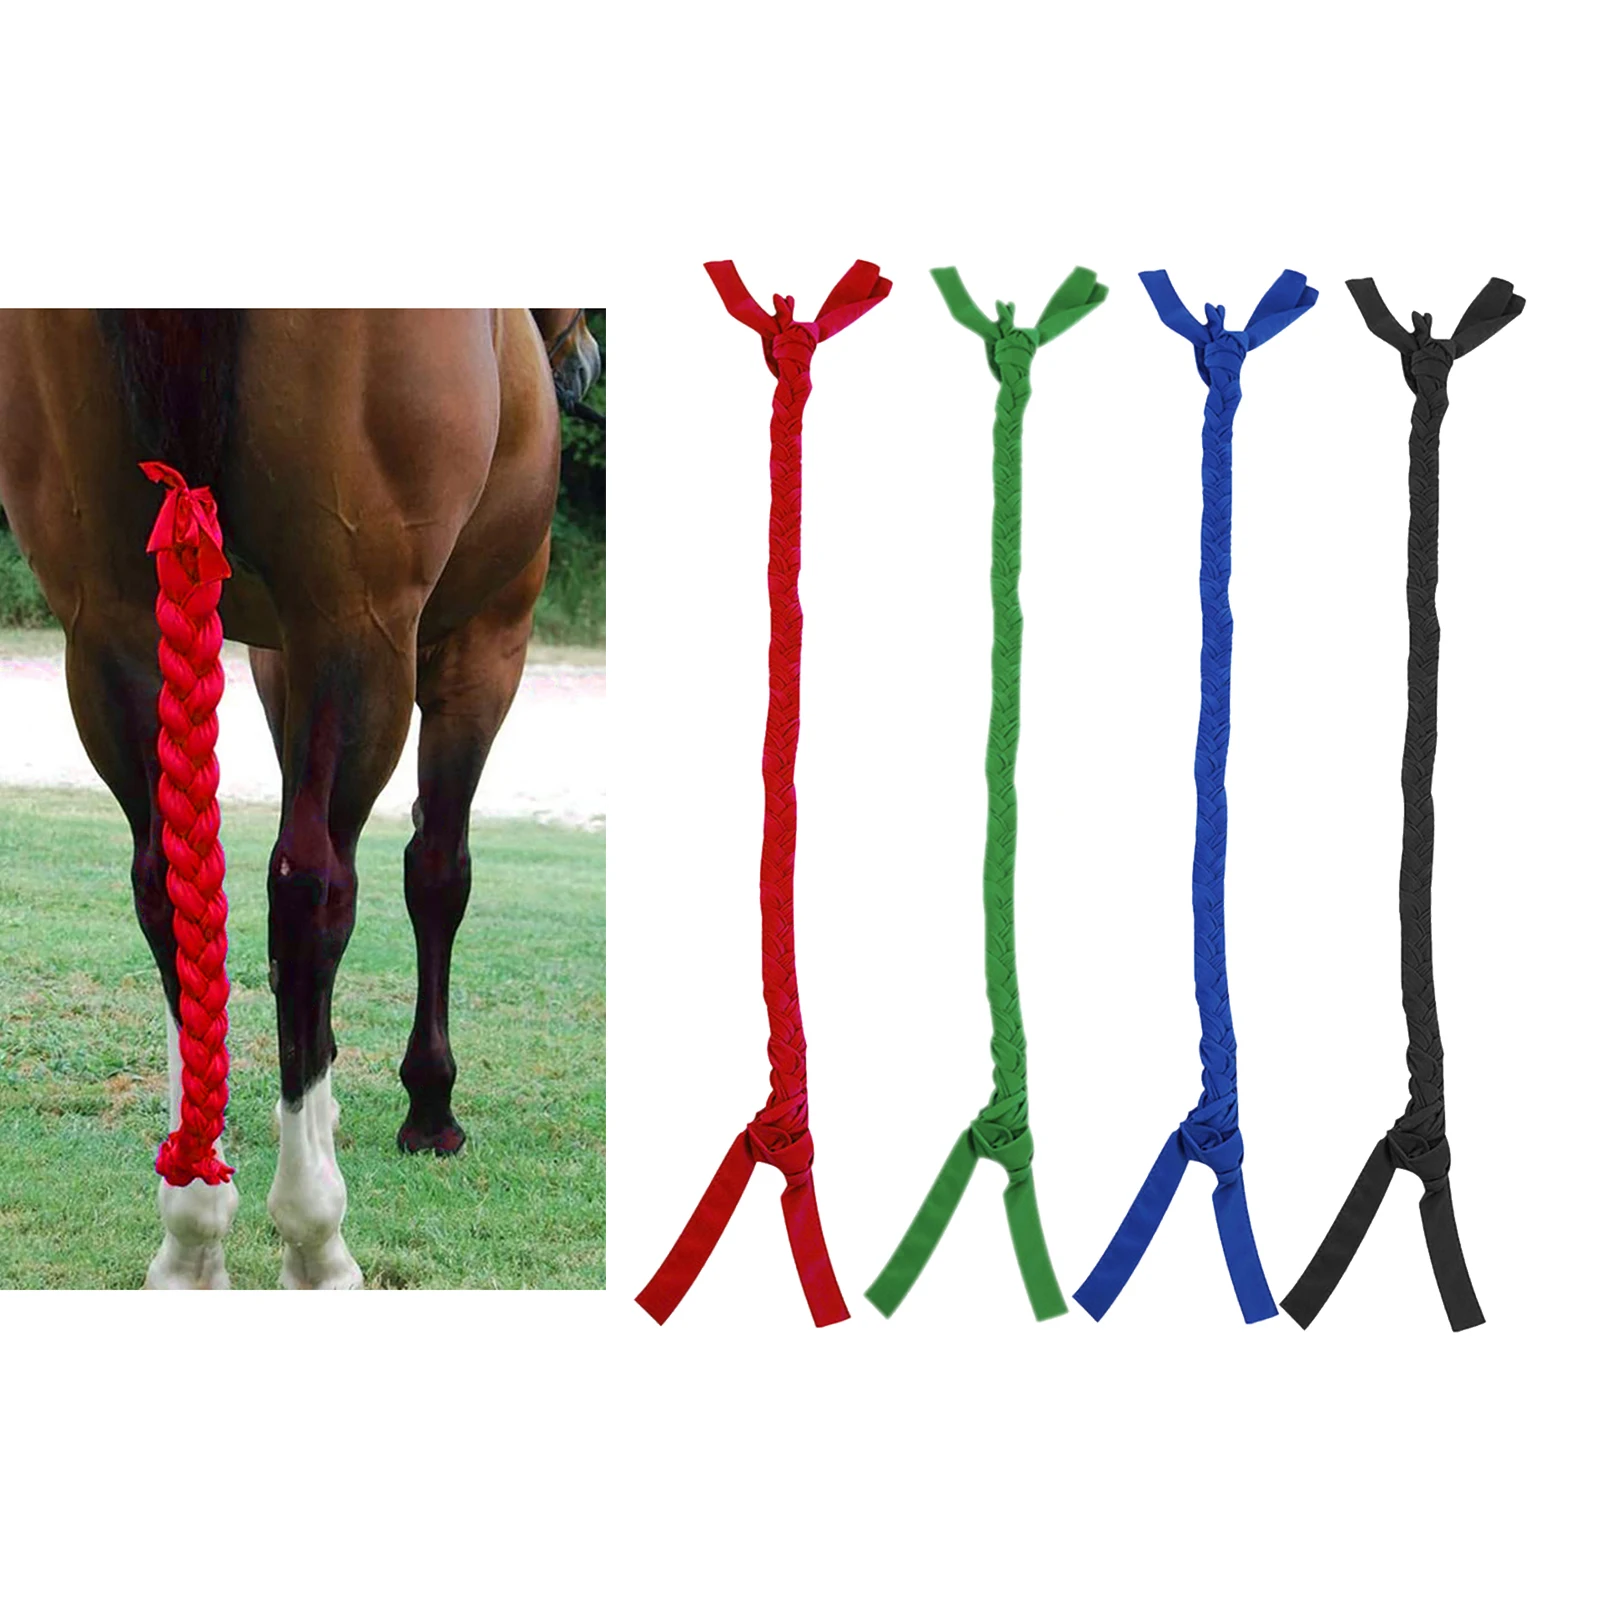 Horse Tail Extension Bags Covers For Customize Lycra Slip YJ.TAIL 